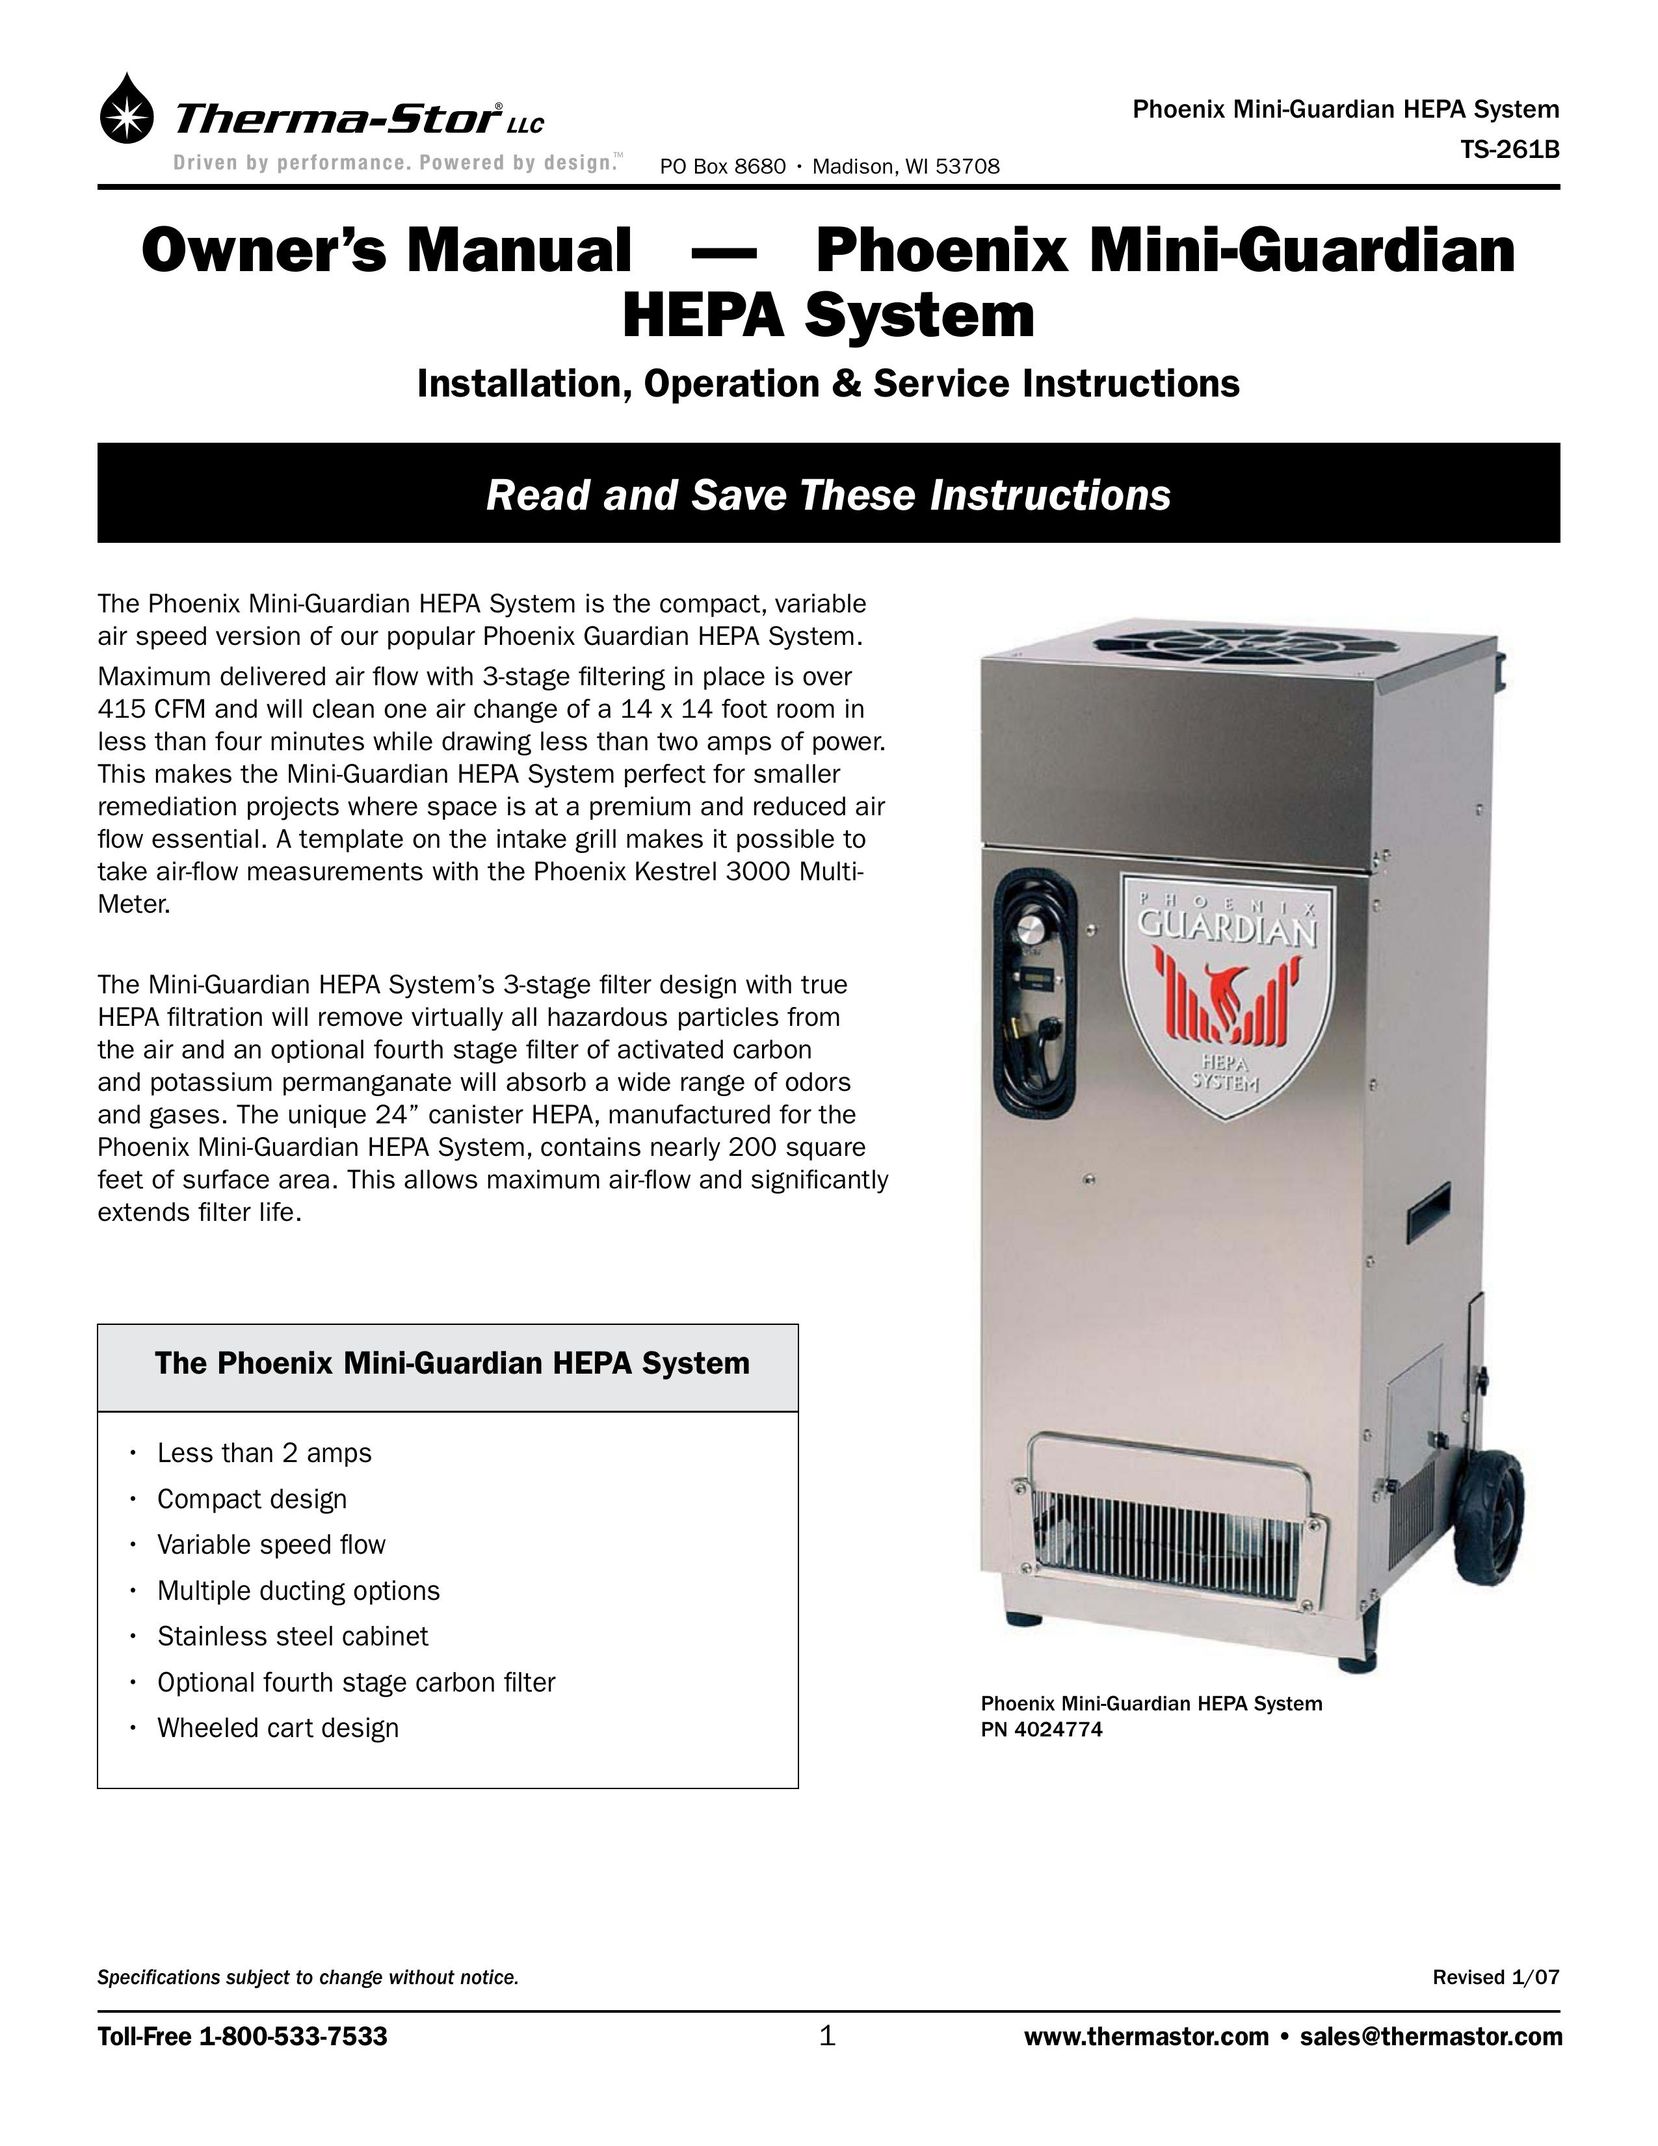 Therma-Stor Products Group TS-261B Air Cleaner User Manual